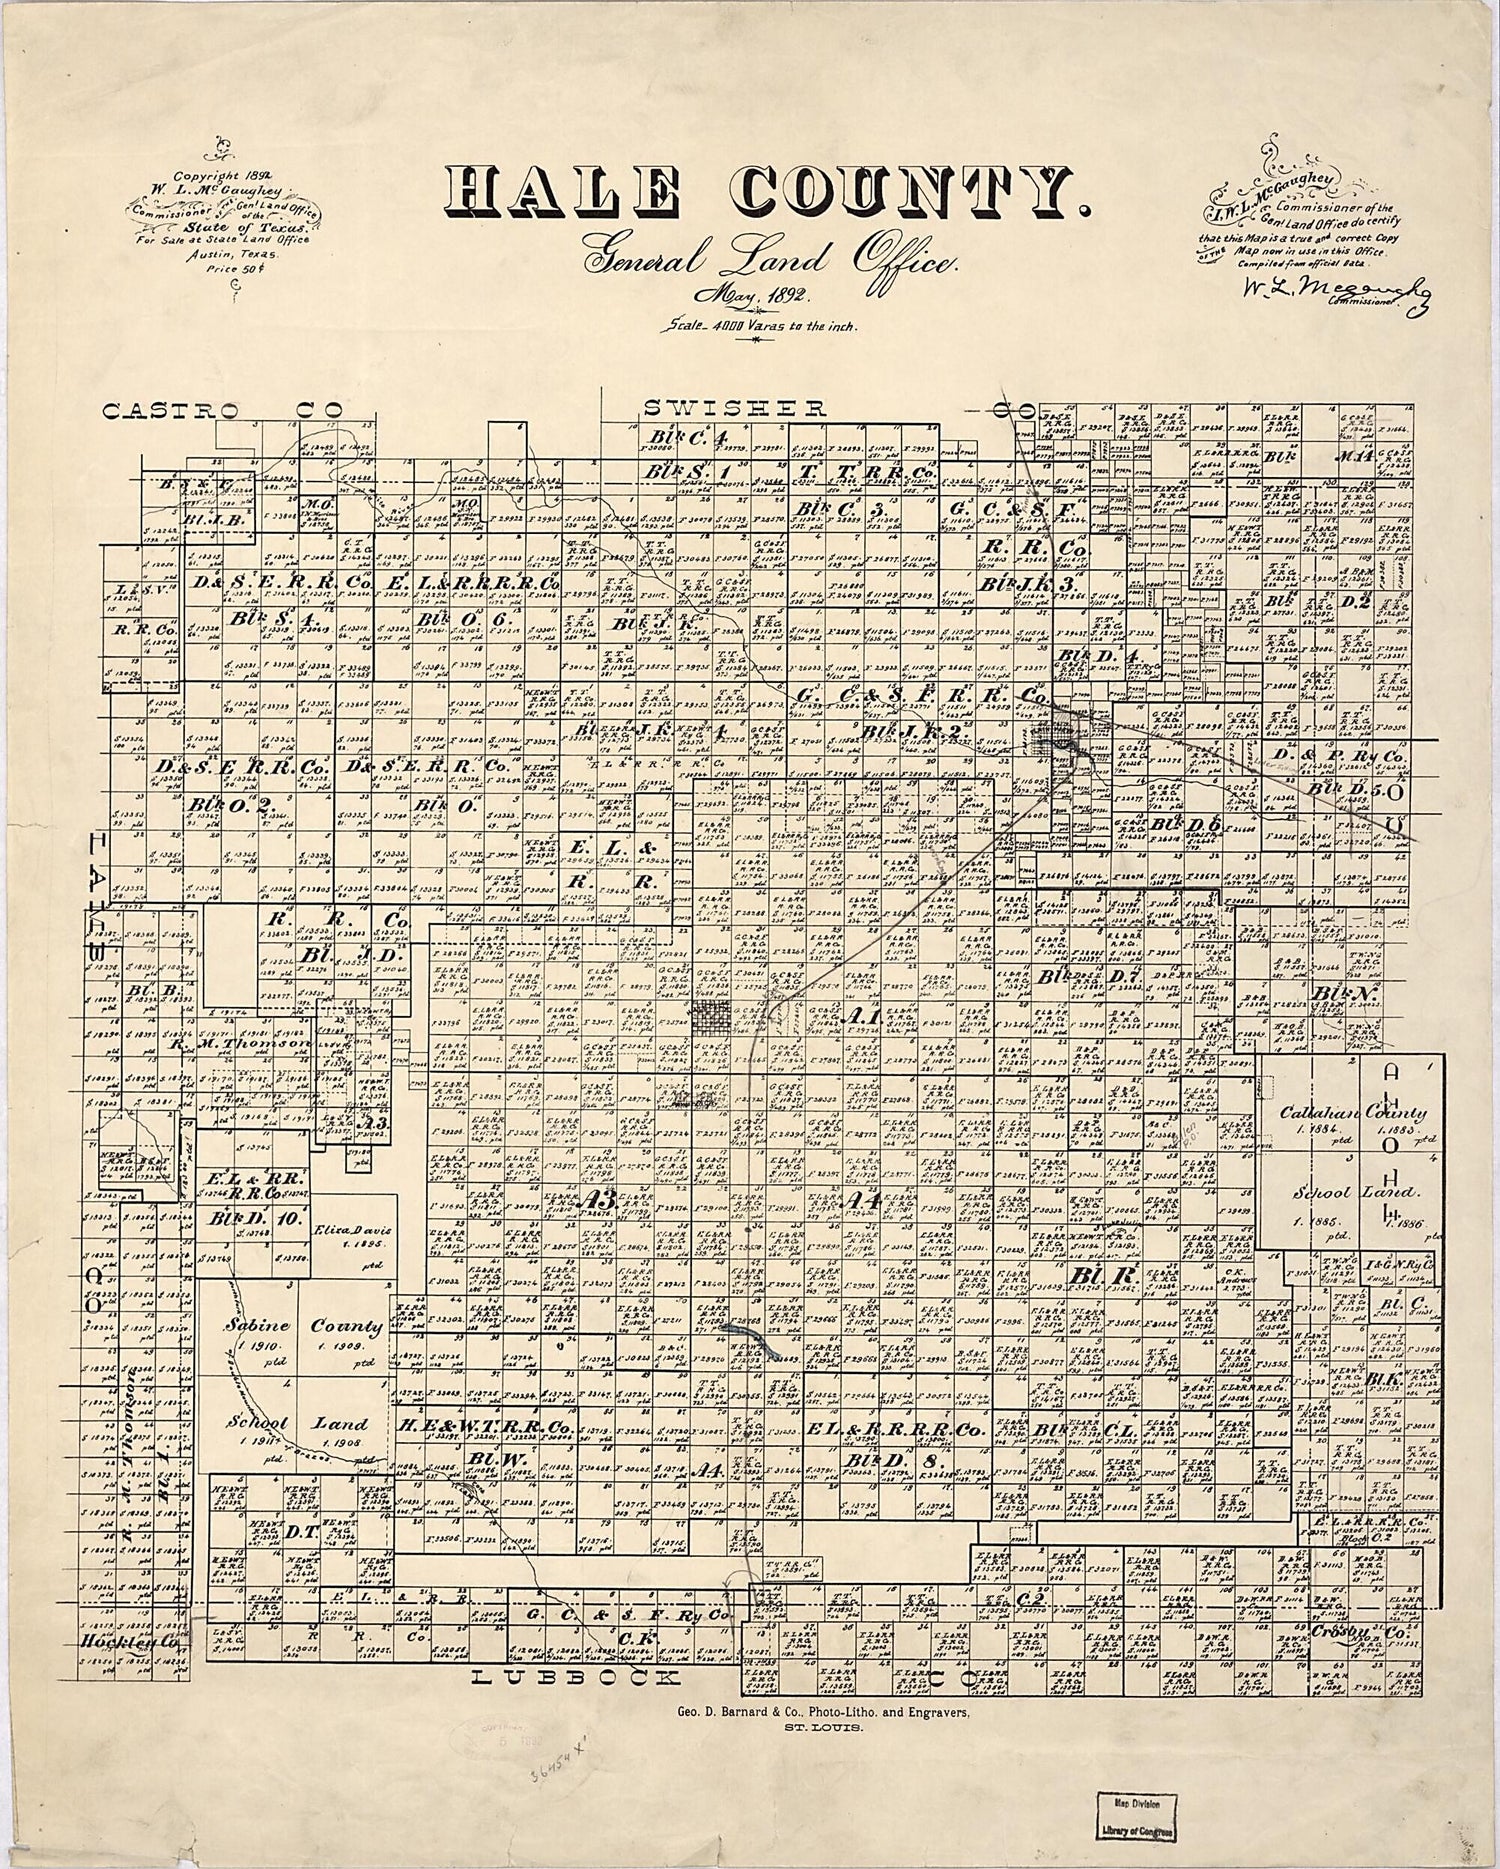 This old map of Hale County : General Land Office, May from 1892 was created by W. L. McGaughey,  Texas. General Land Office in 1892